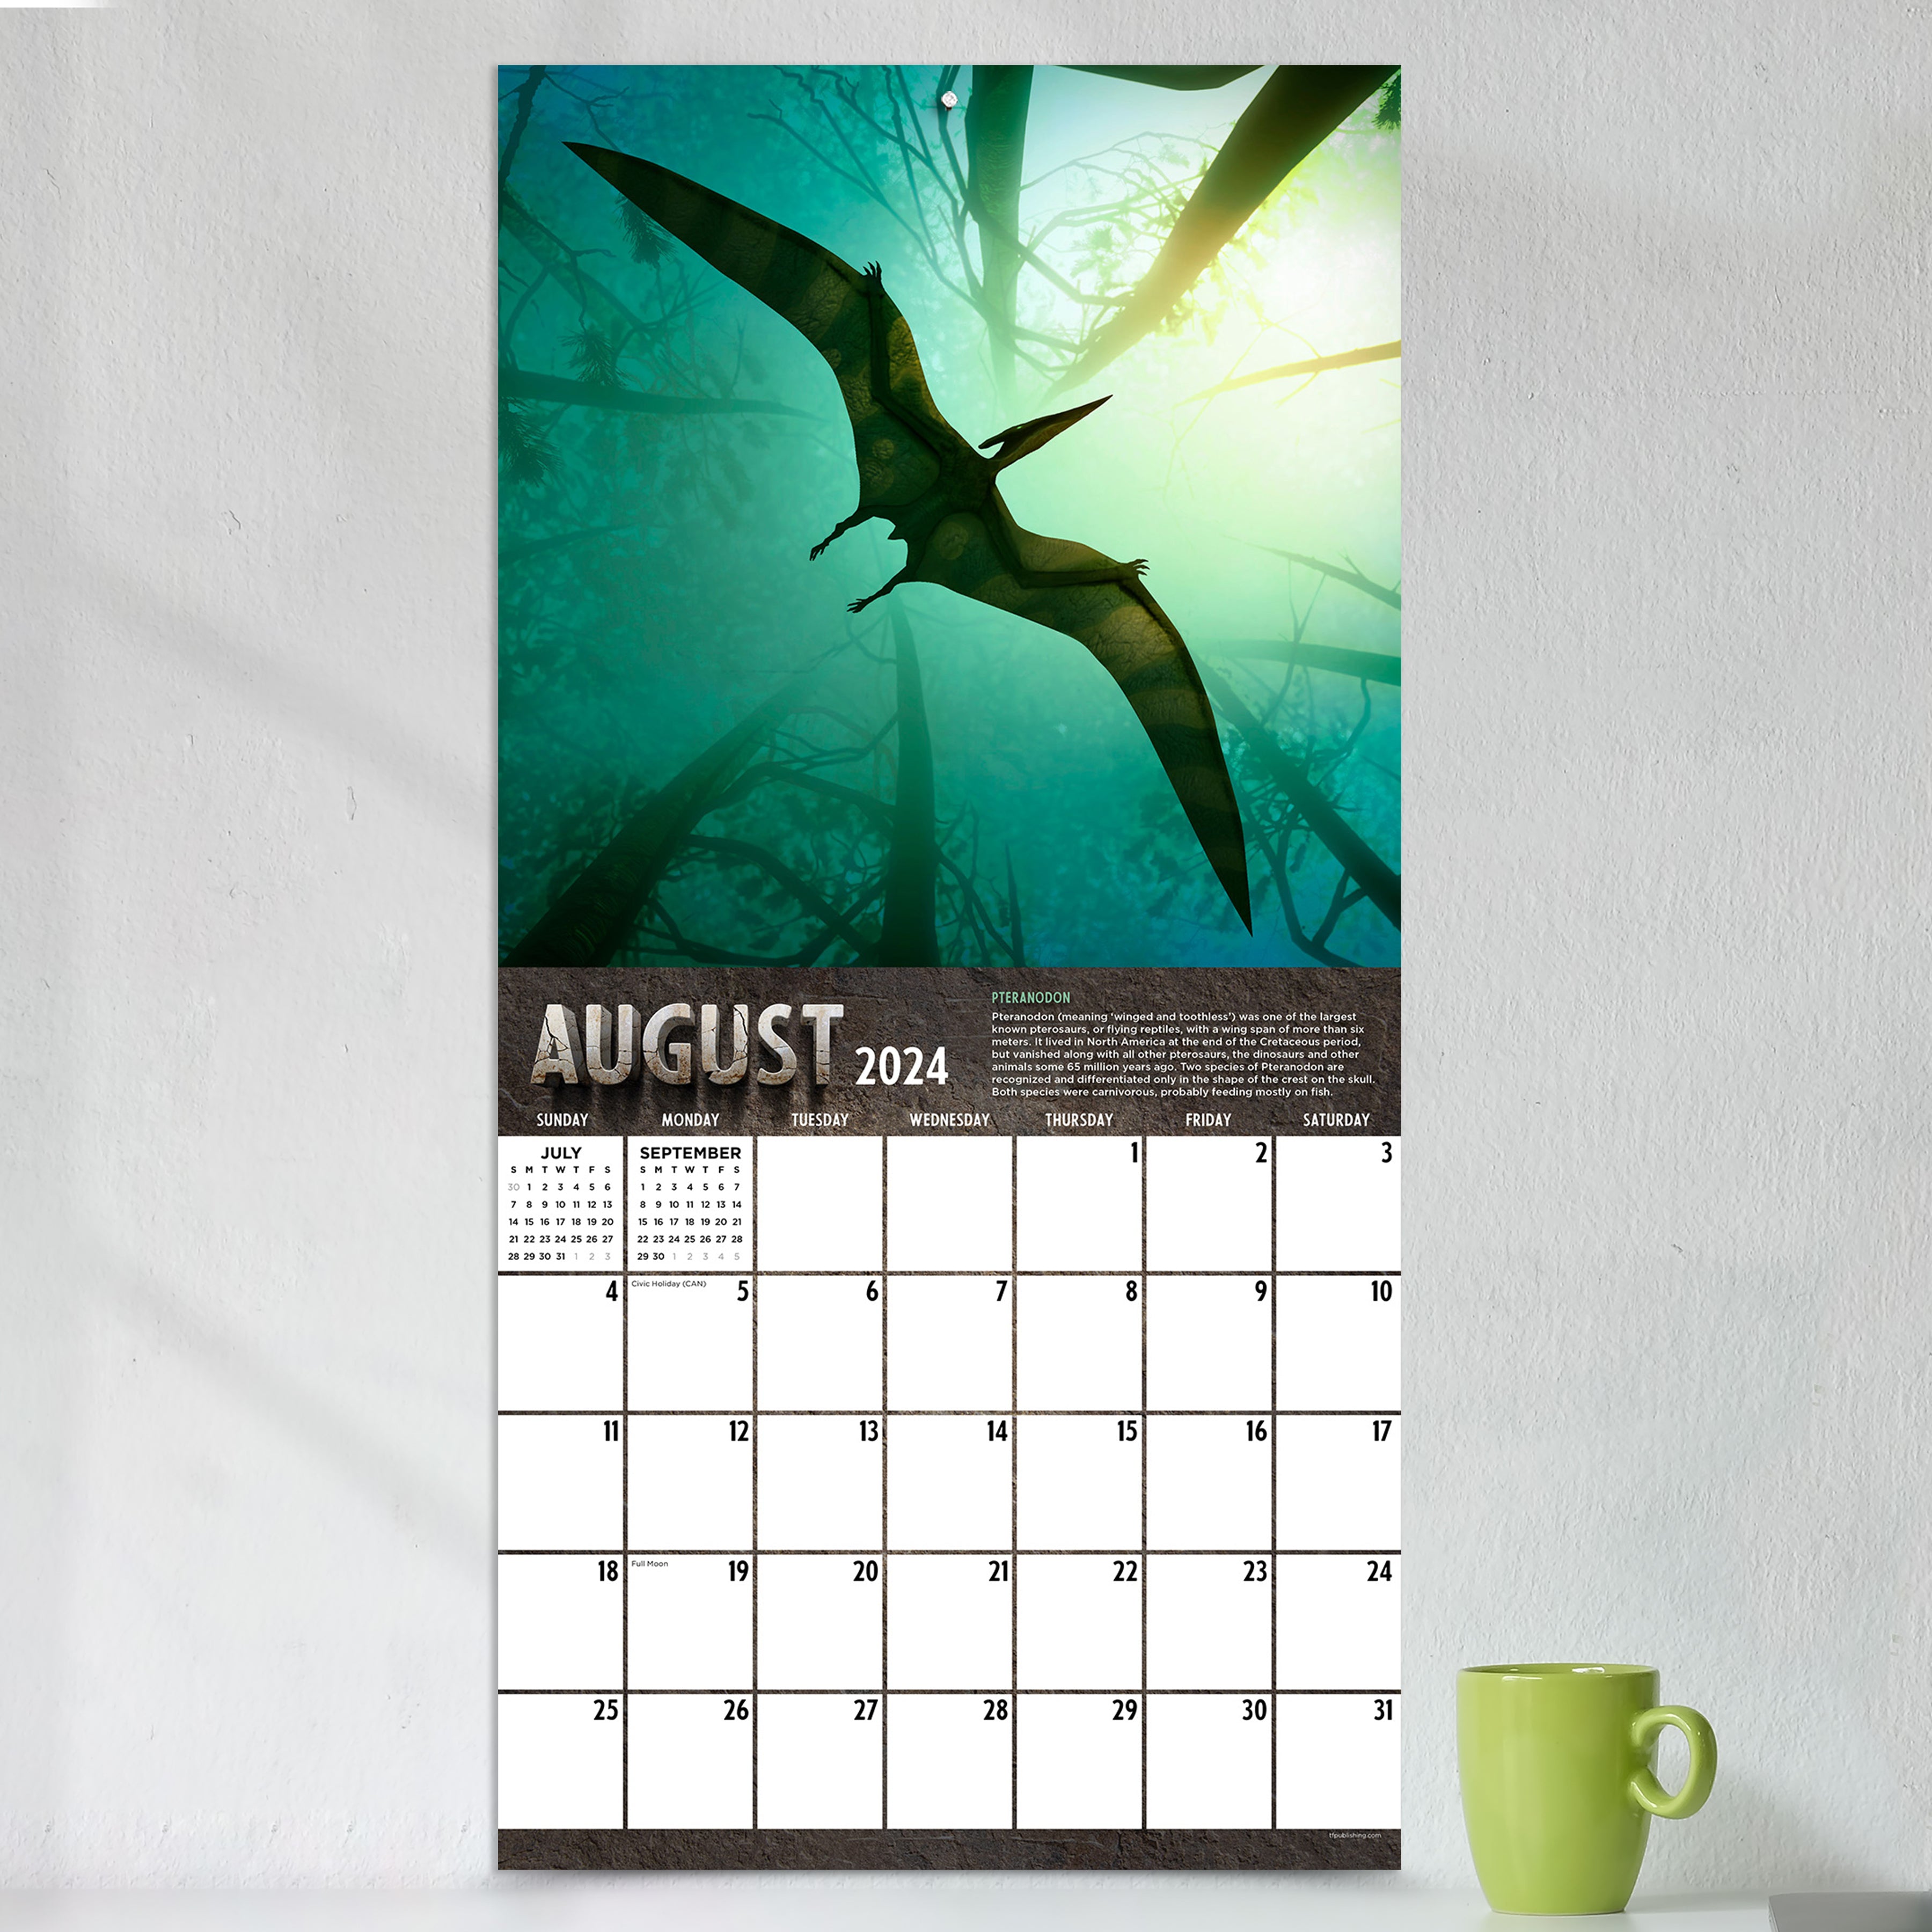 2024 Dinosaurs (by TF Publishing) - Square Wall Calendar